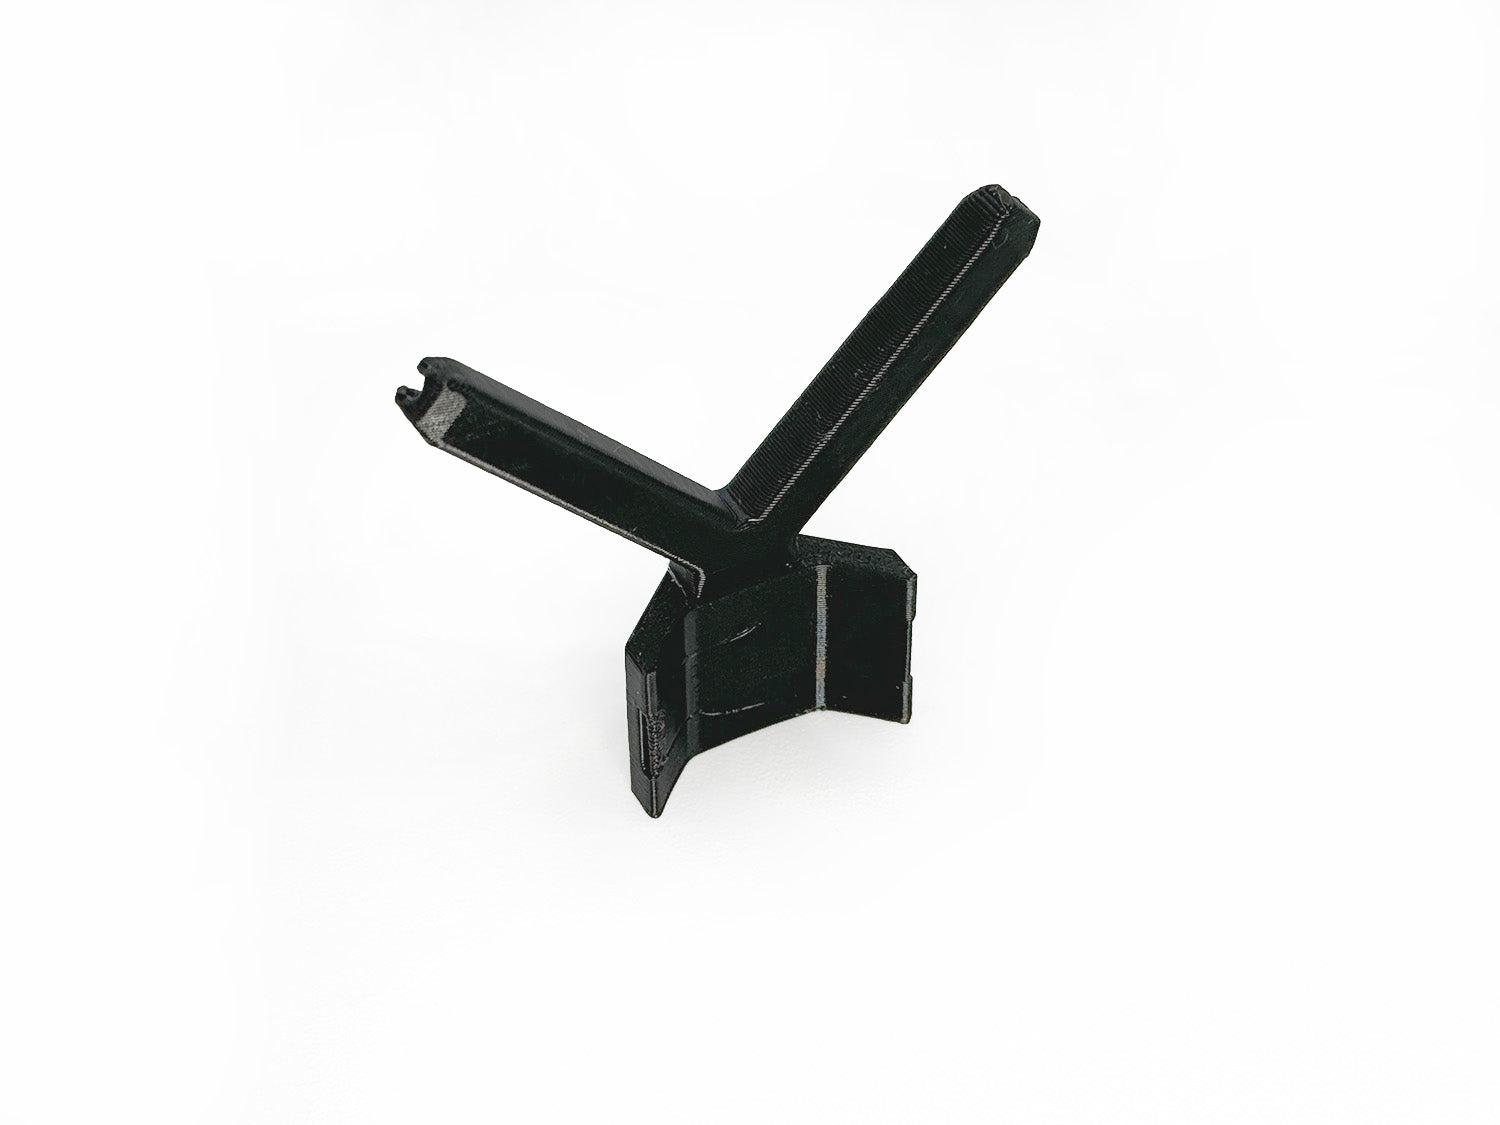 Xguard Boom Antenna Mount for Tron 7 and Advance